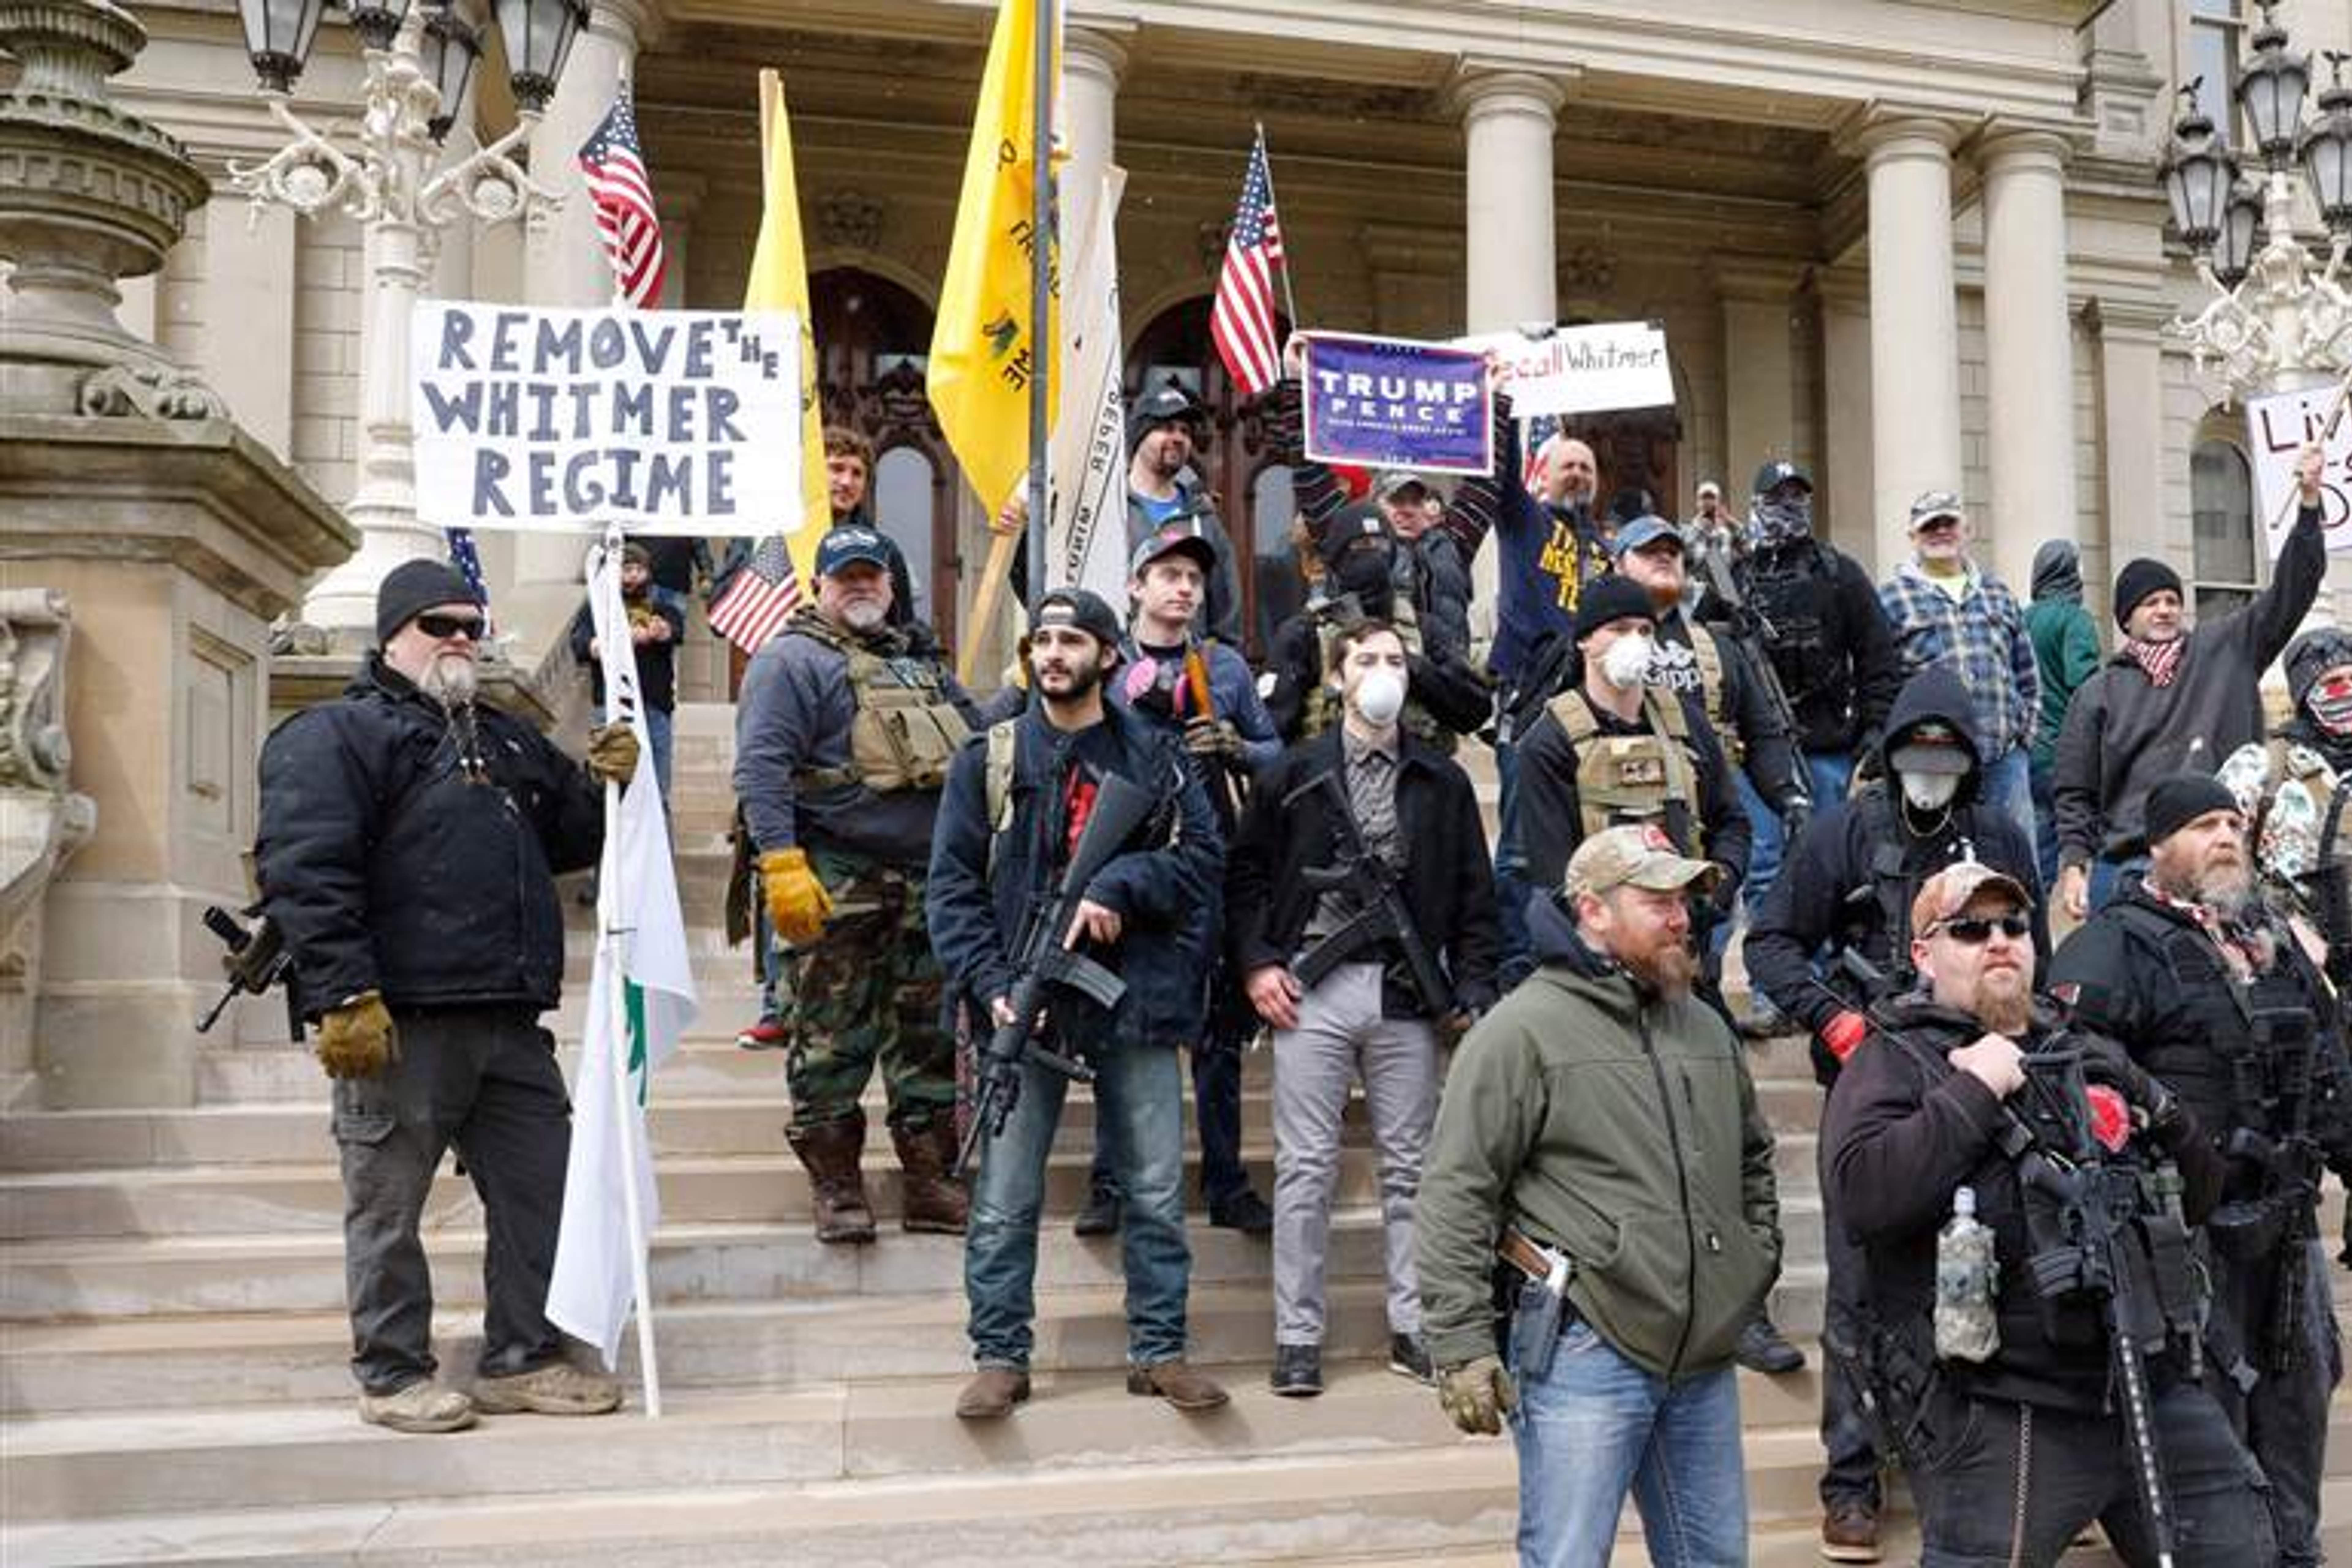 A crowd of pathetic men with weapons gathers on the Michigan capitol stairs